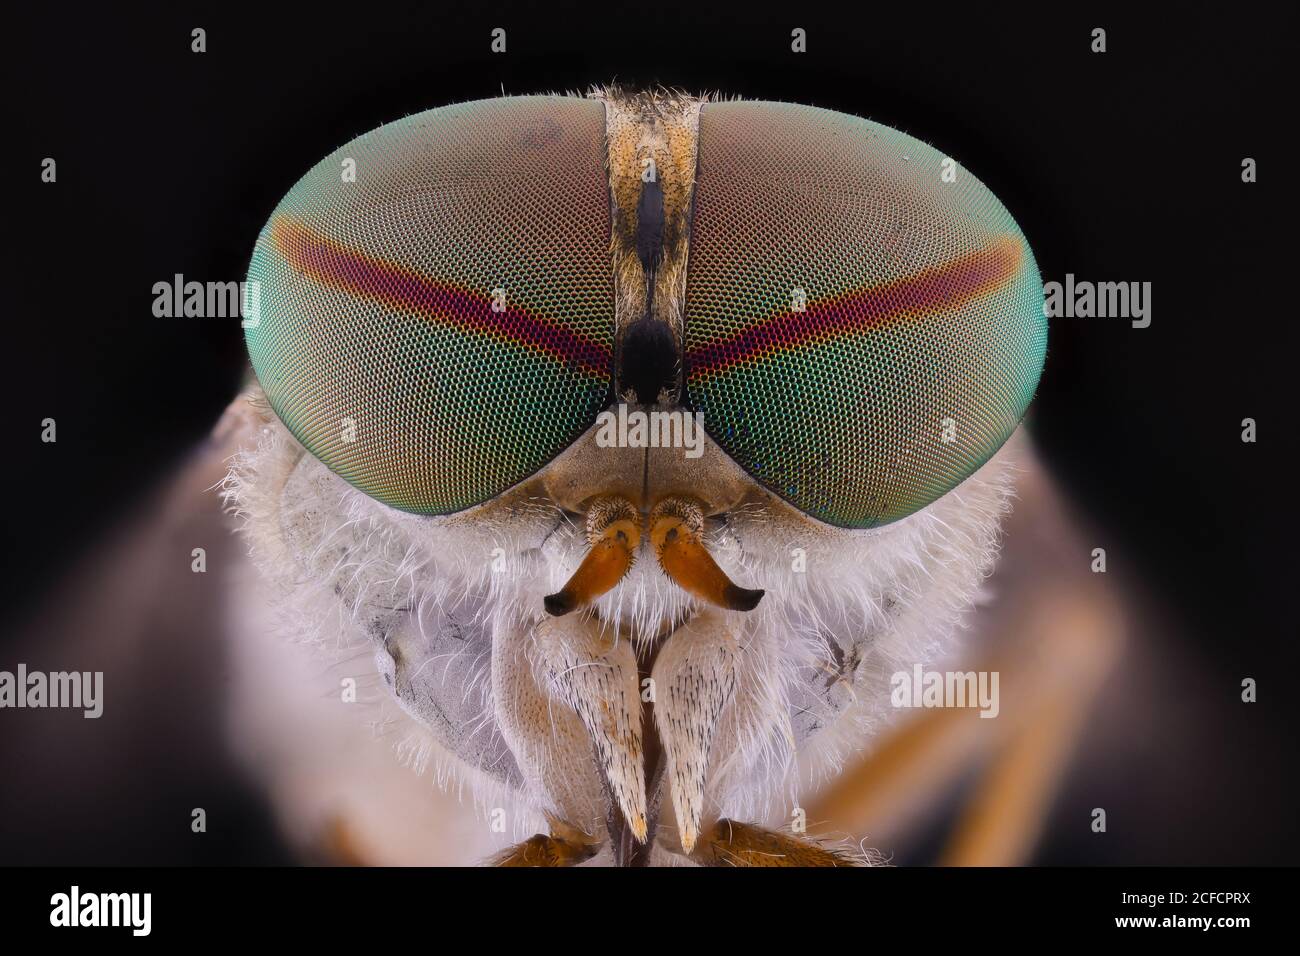 Closeup of magnified grey head of flying insect with round convex green eyes Stock Photo